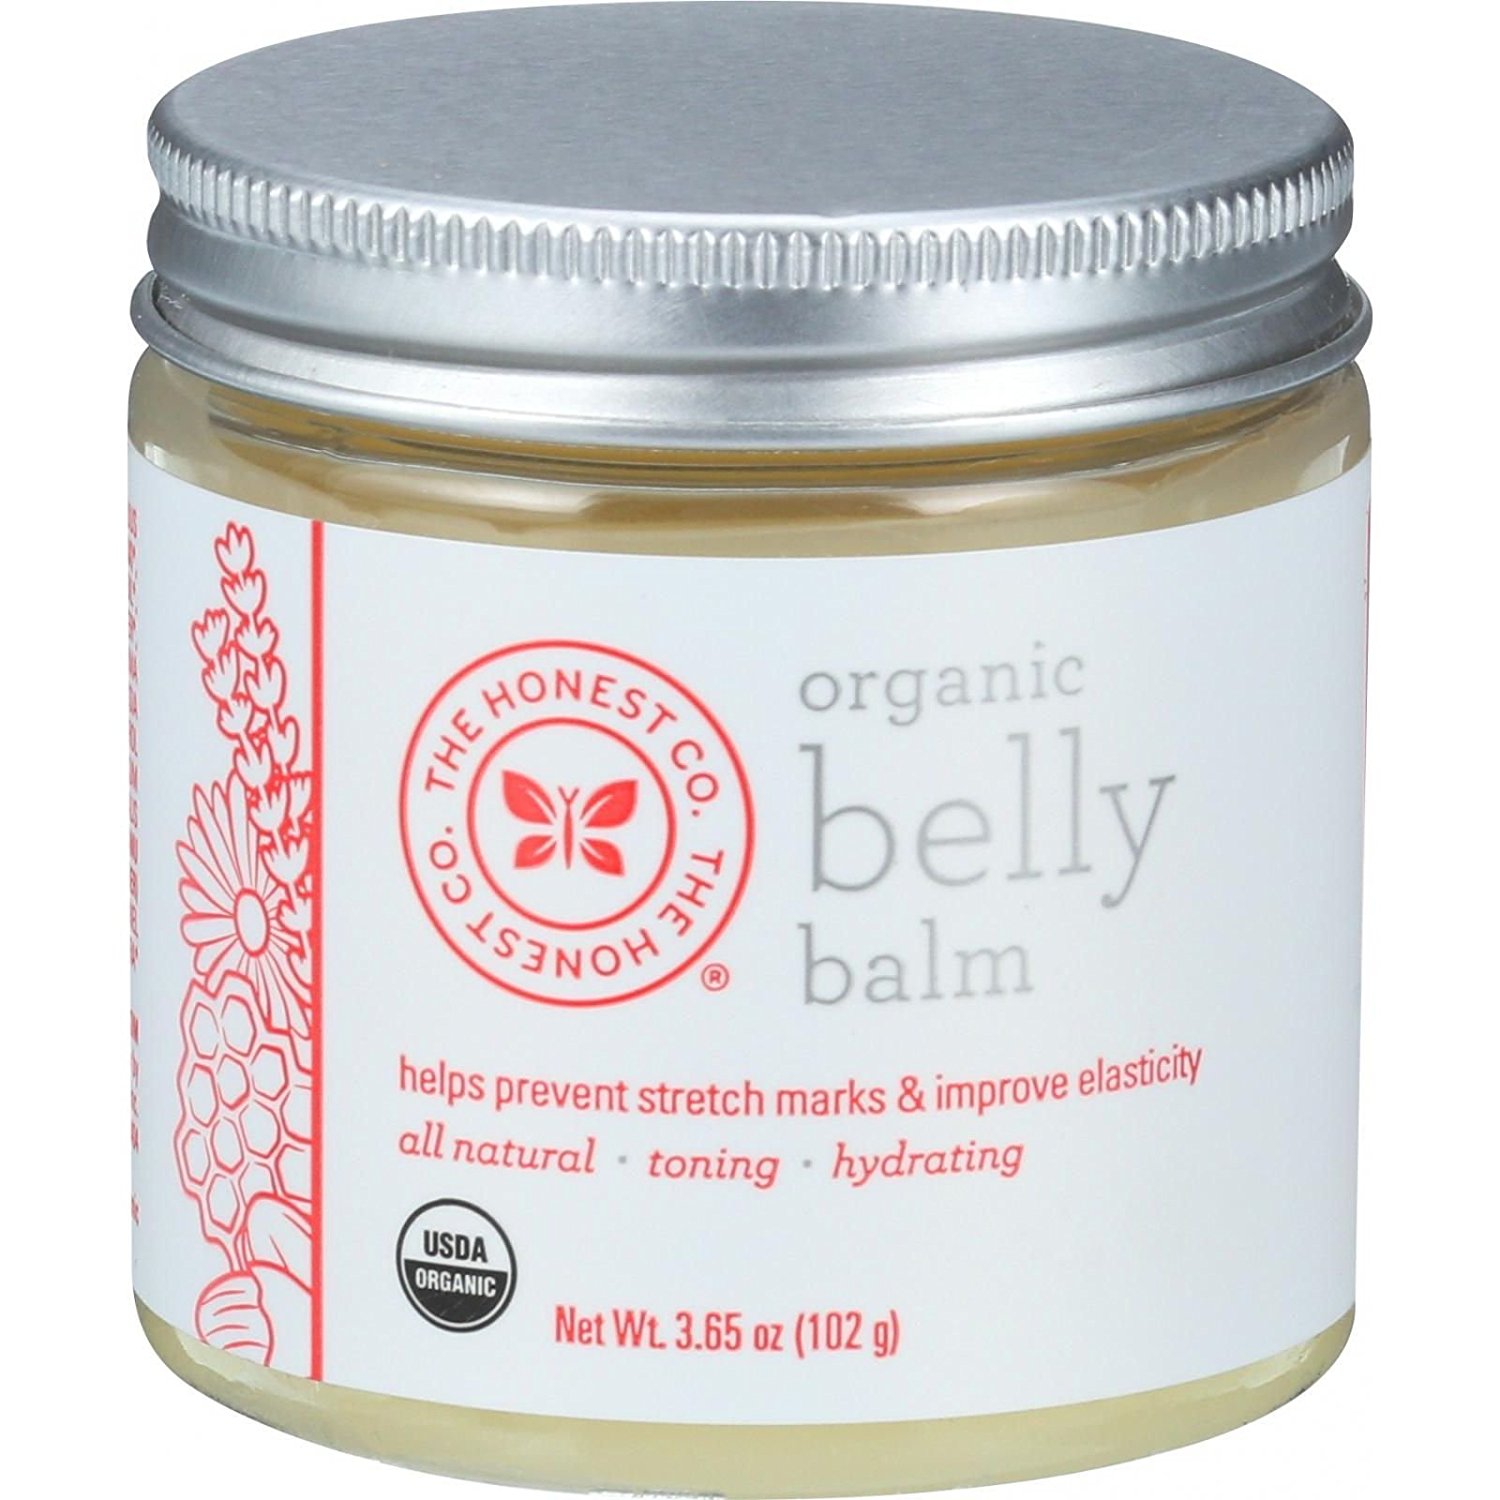 the honest company organic belly balm, belly balm, organic belly balm, best pregnancy skin care products, pregnancy skin care products, safe pregnancy products